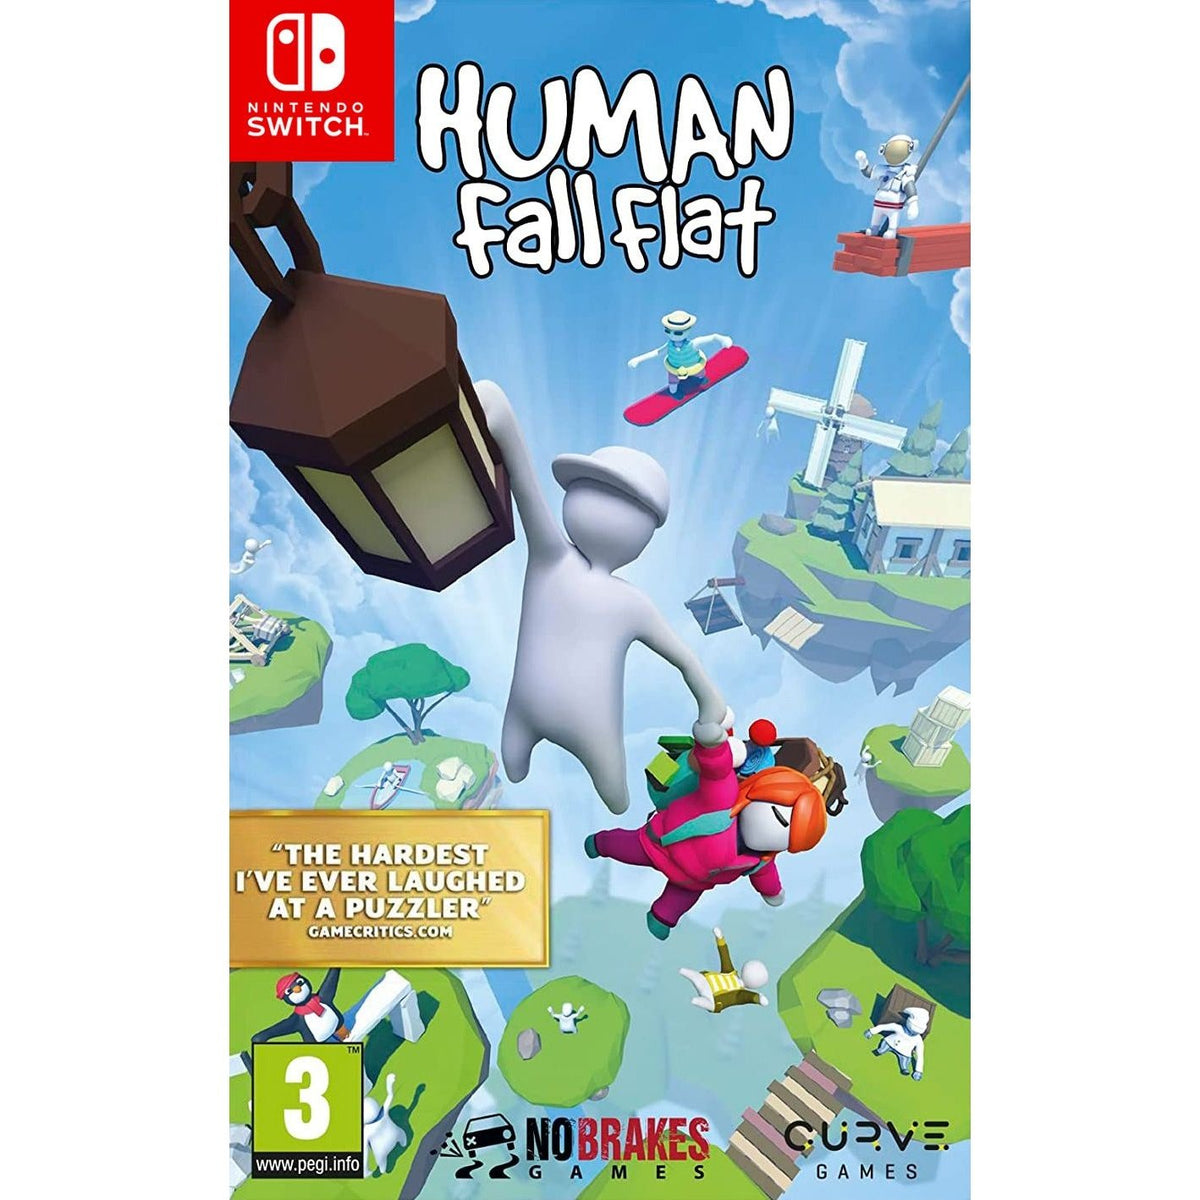 Human Fall Flat - Includes Exclusive Art Cards Nintendo Switch